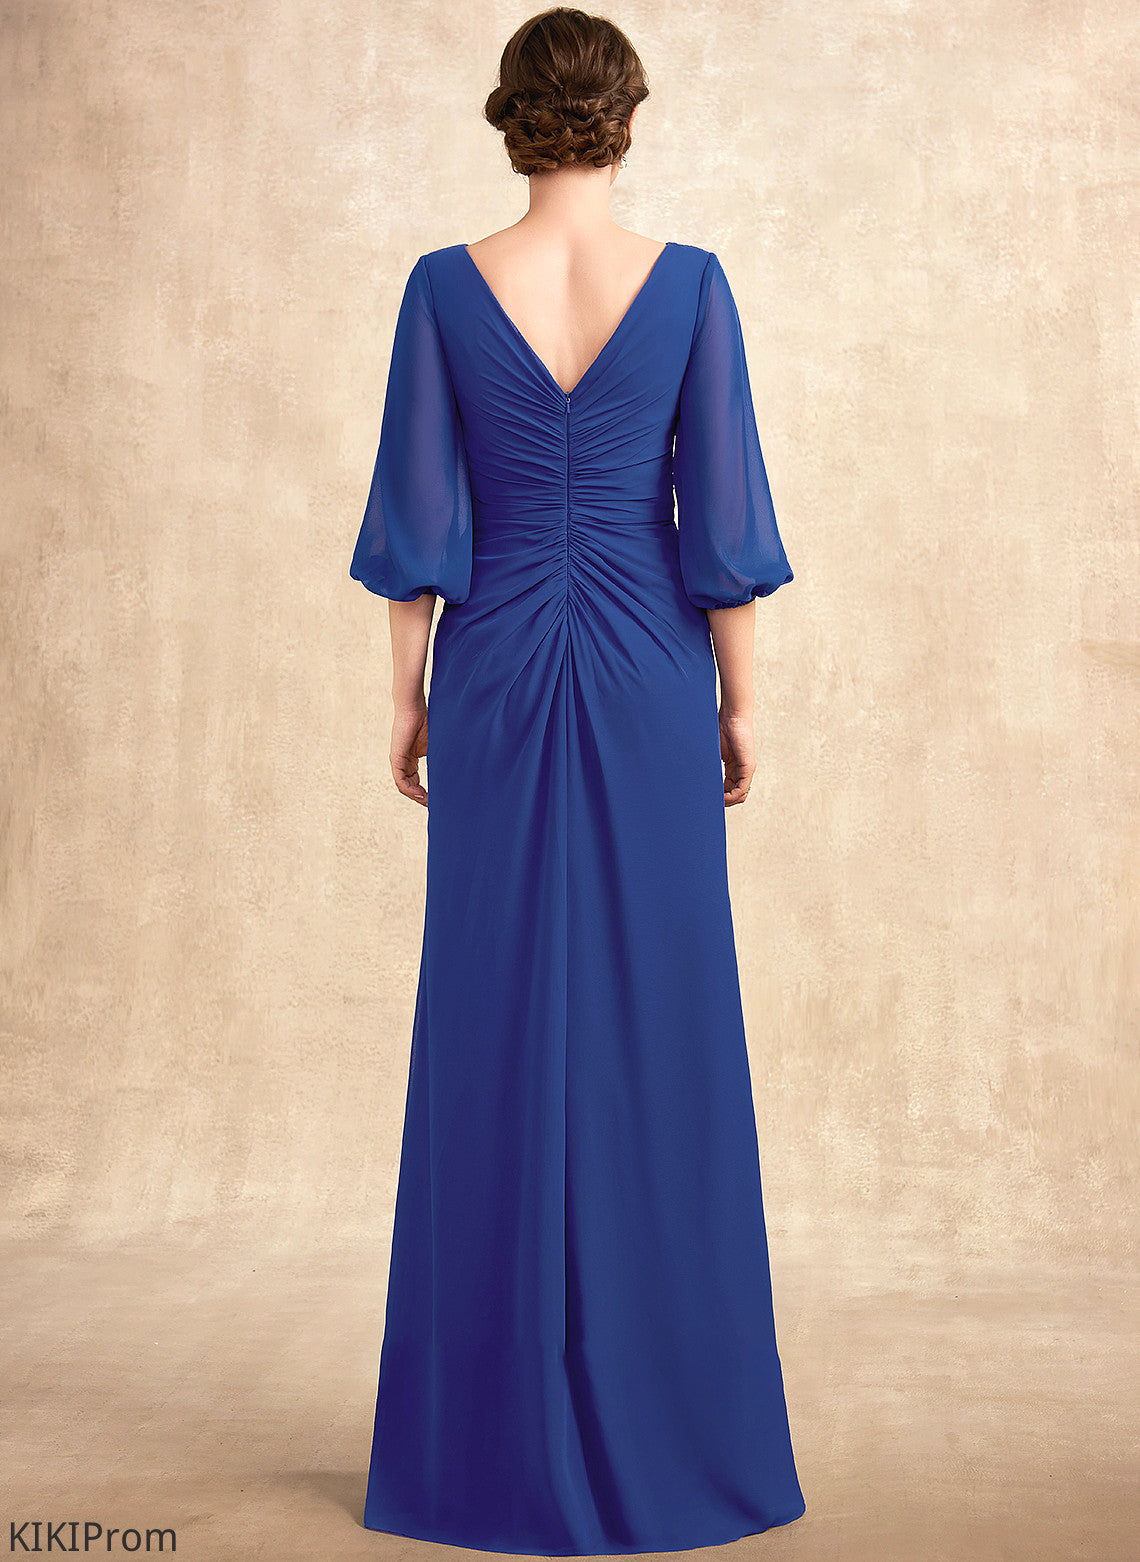 the Dress Floor-Length Neck Mother of the Bride Dresses A-Line Bride Maya of Scoop Ruffle Beading Mother Chiffon With